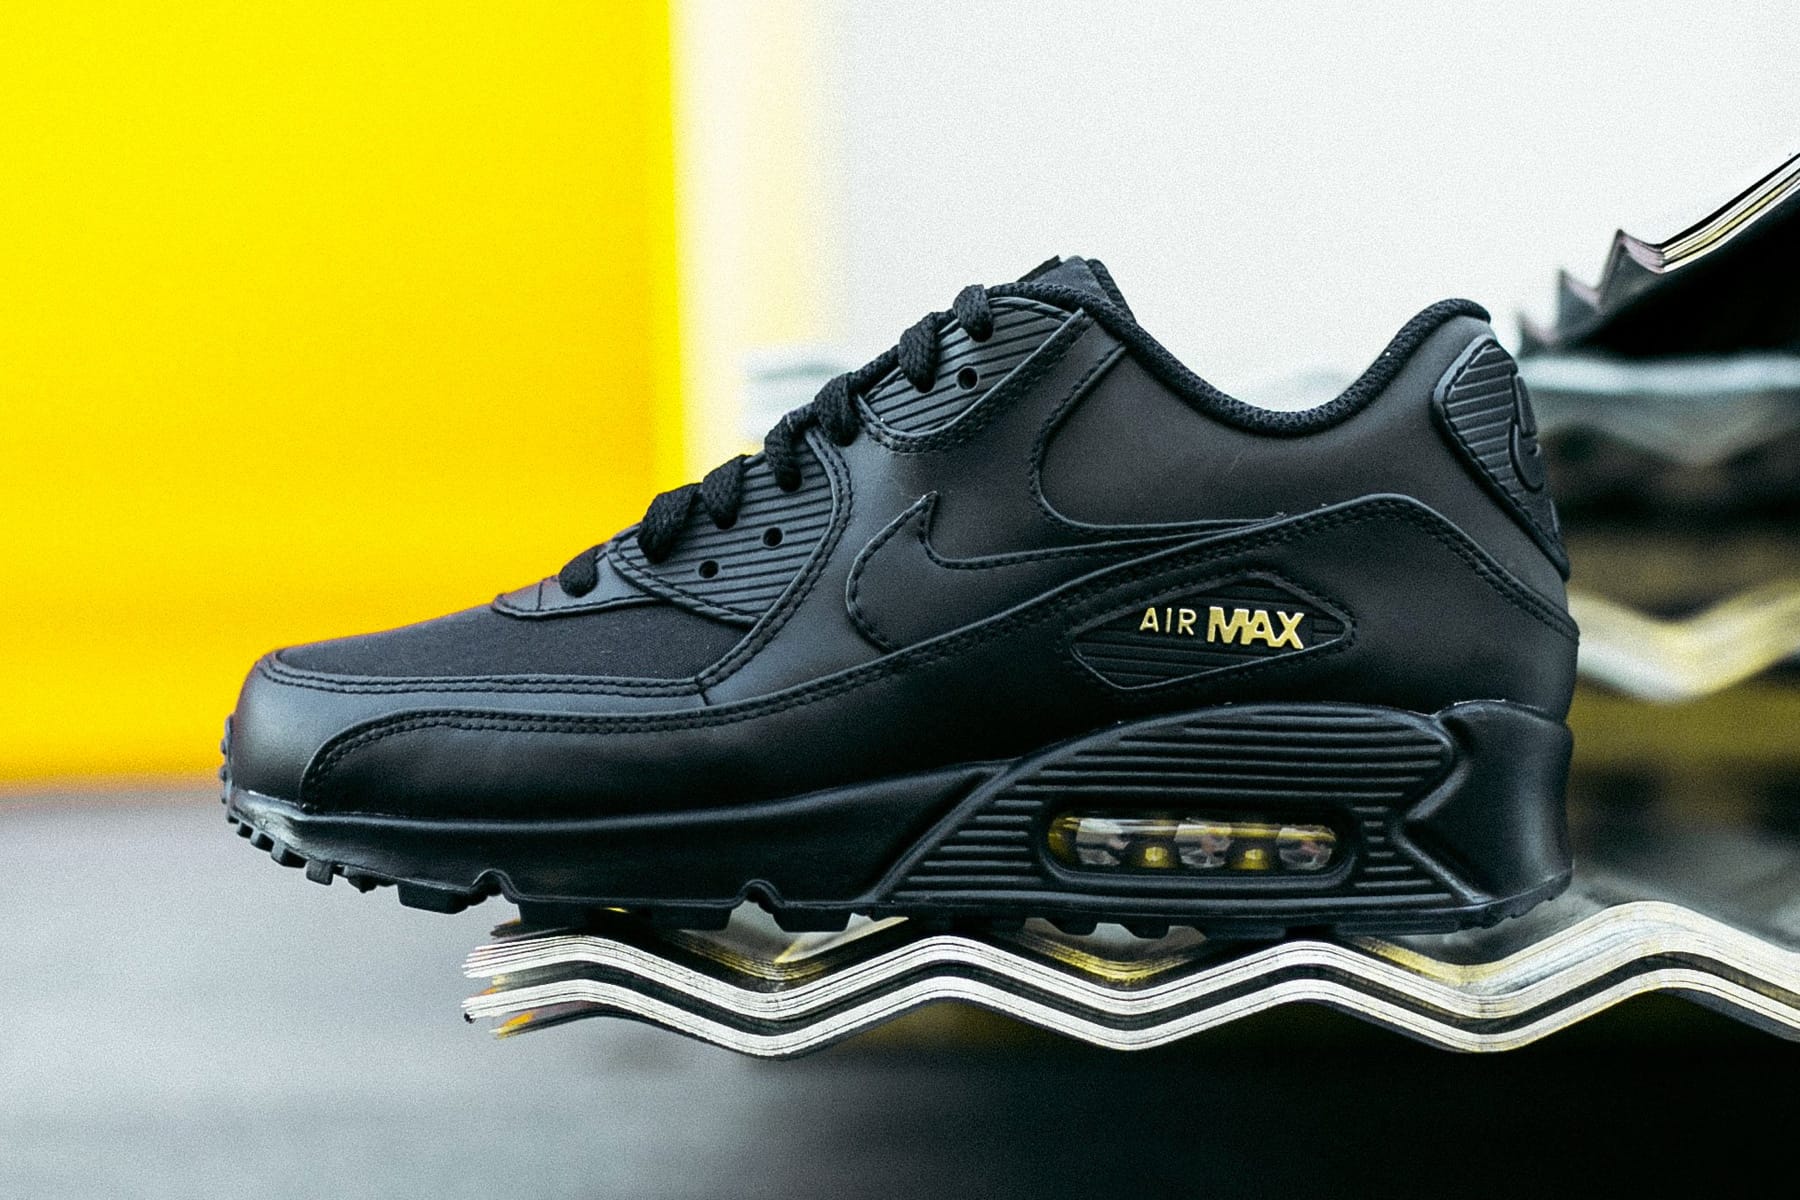 Nike Air Max 90 Black Friday 2017 Black Gold Release Date